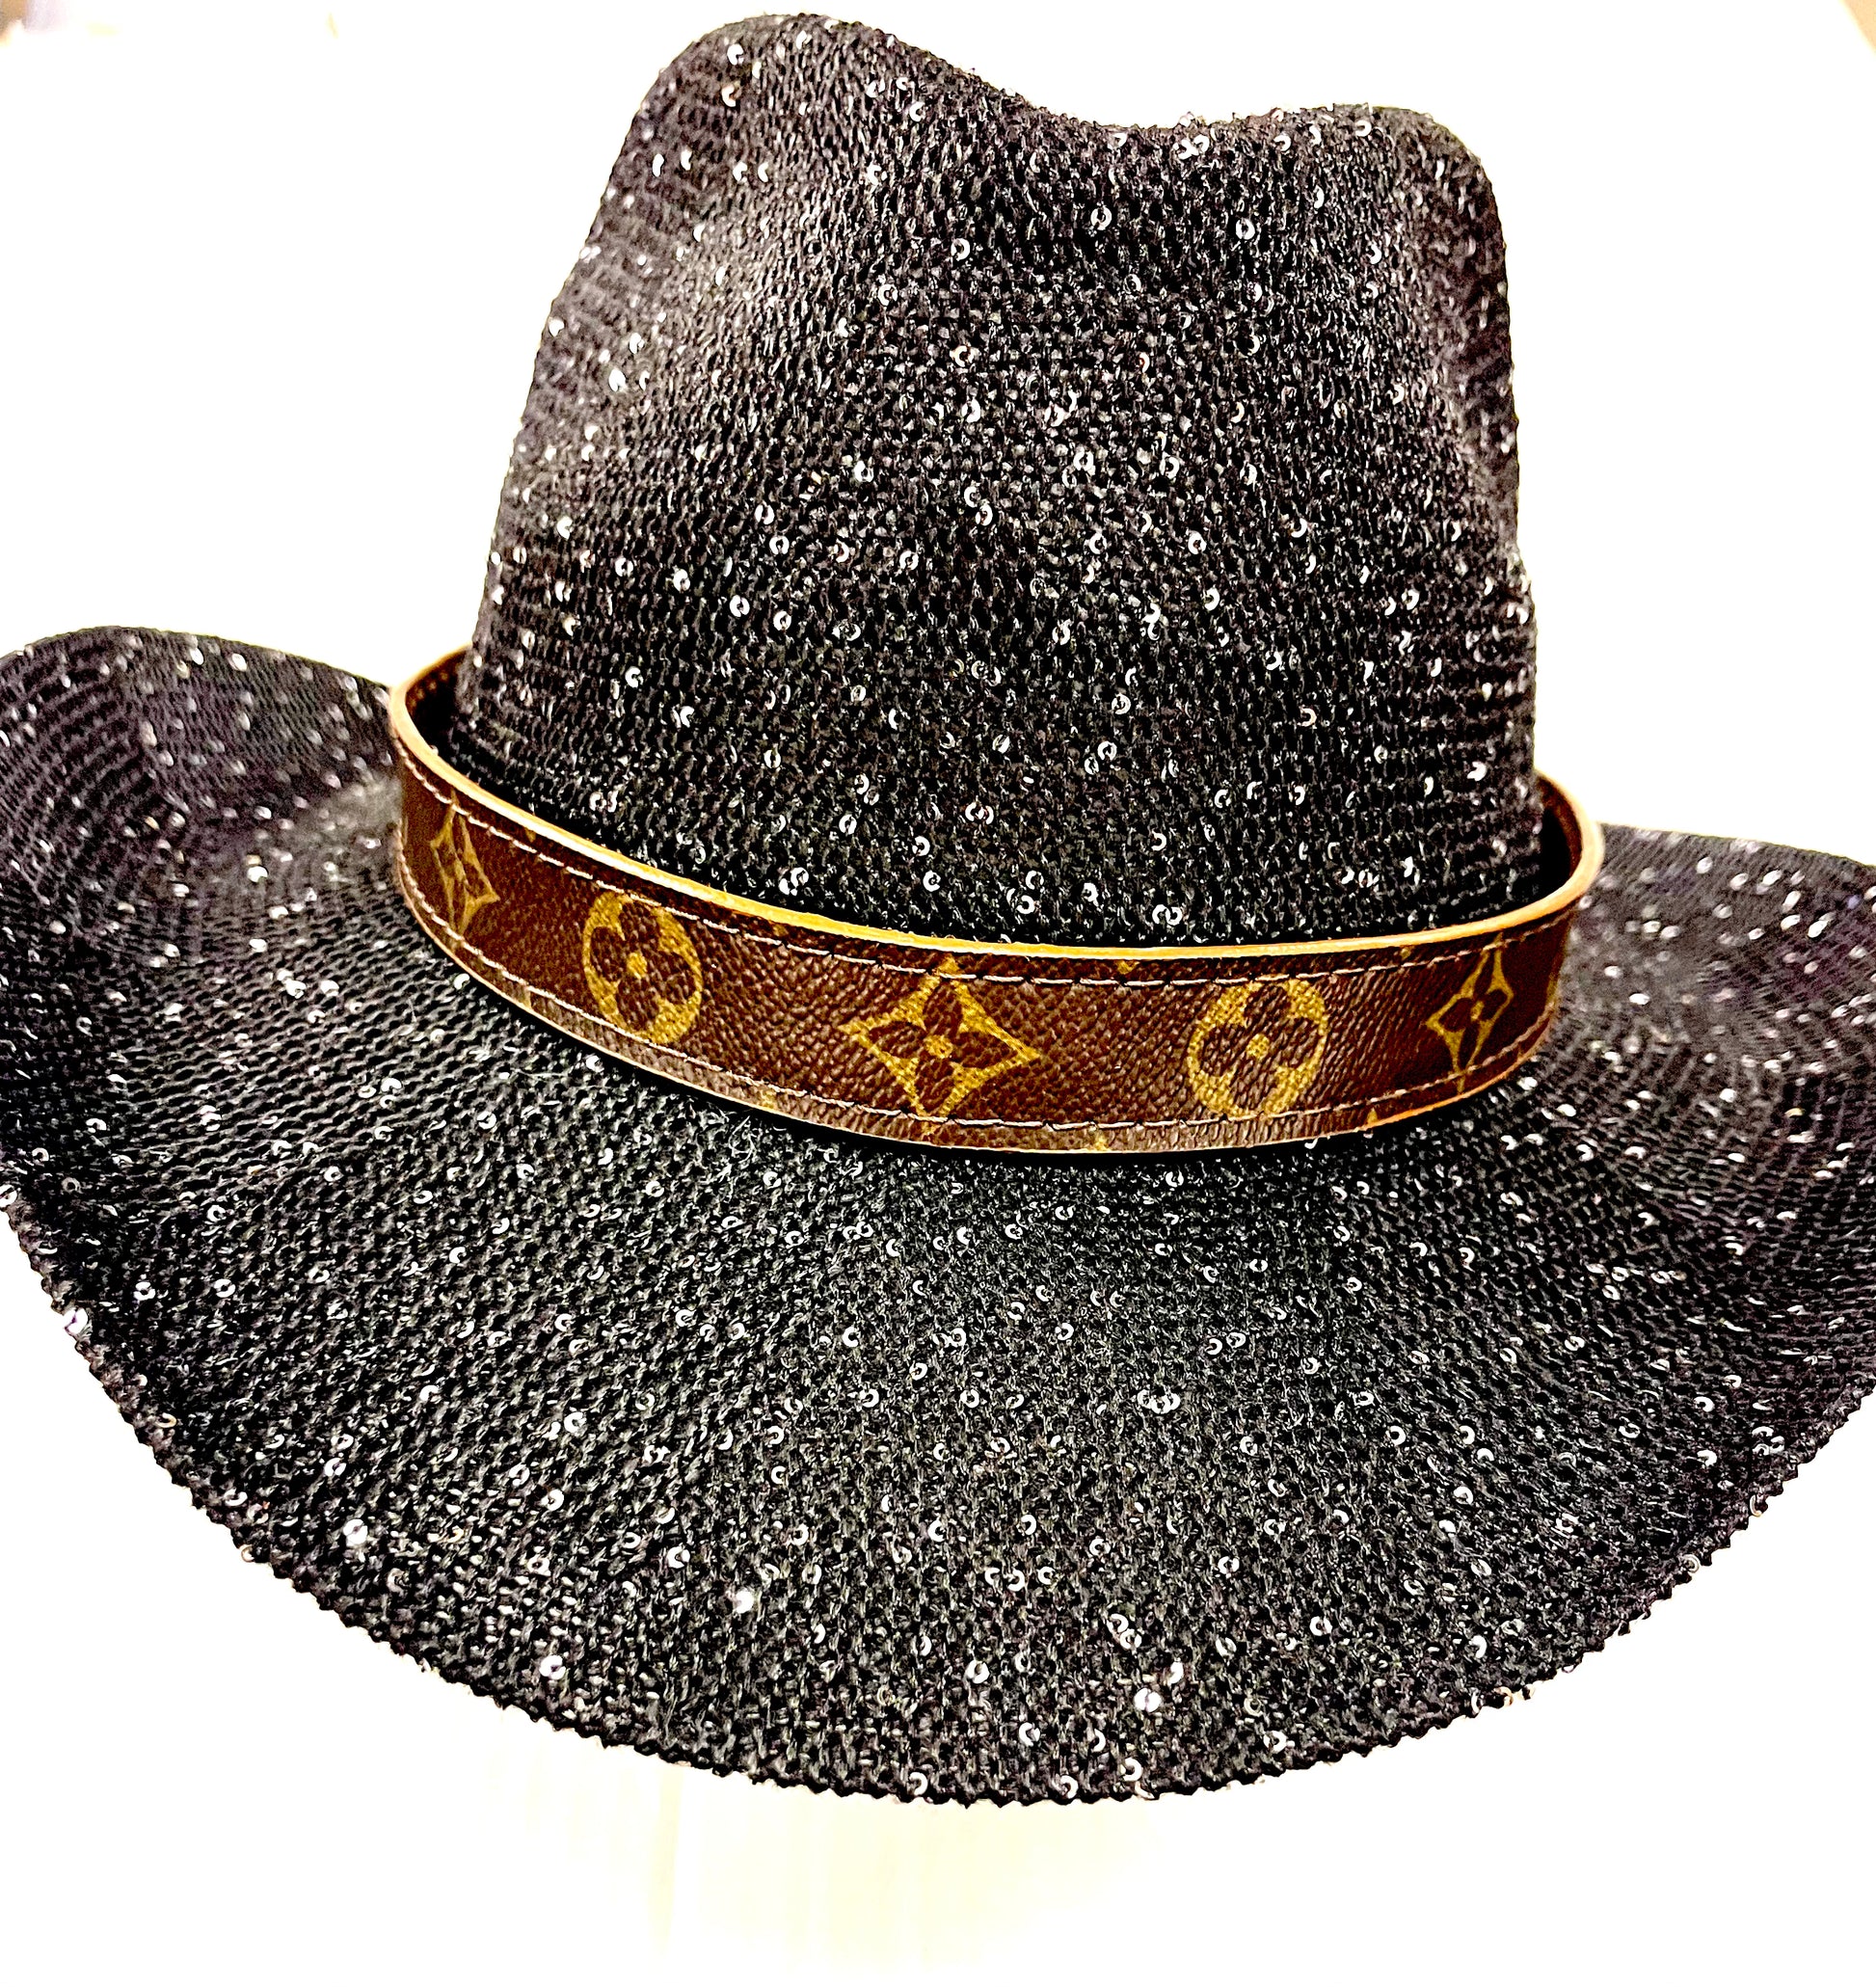 Black Sparkle Cowgirl Hat with flourish hat belt UPF 50+ sun protection - Patches Of Upcycling